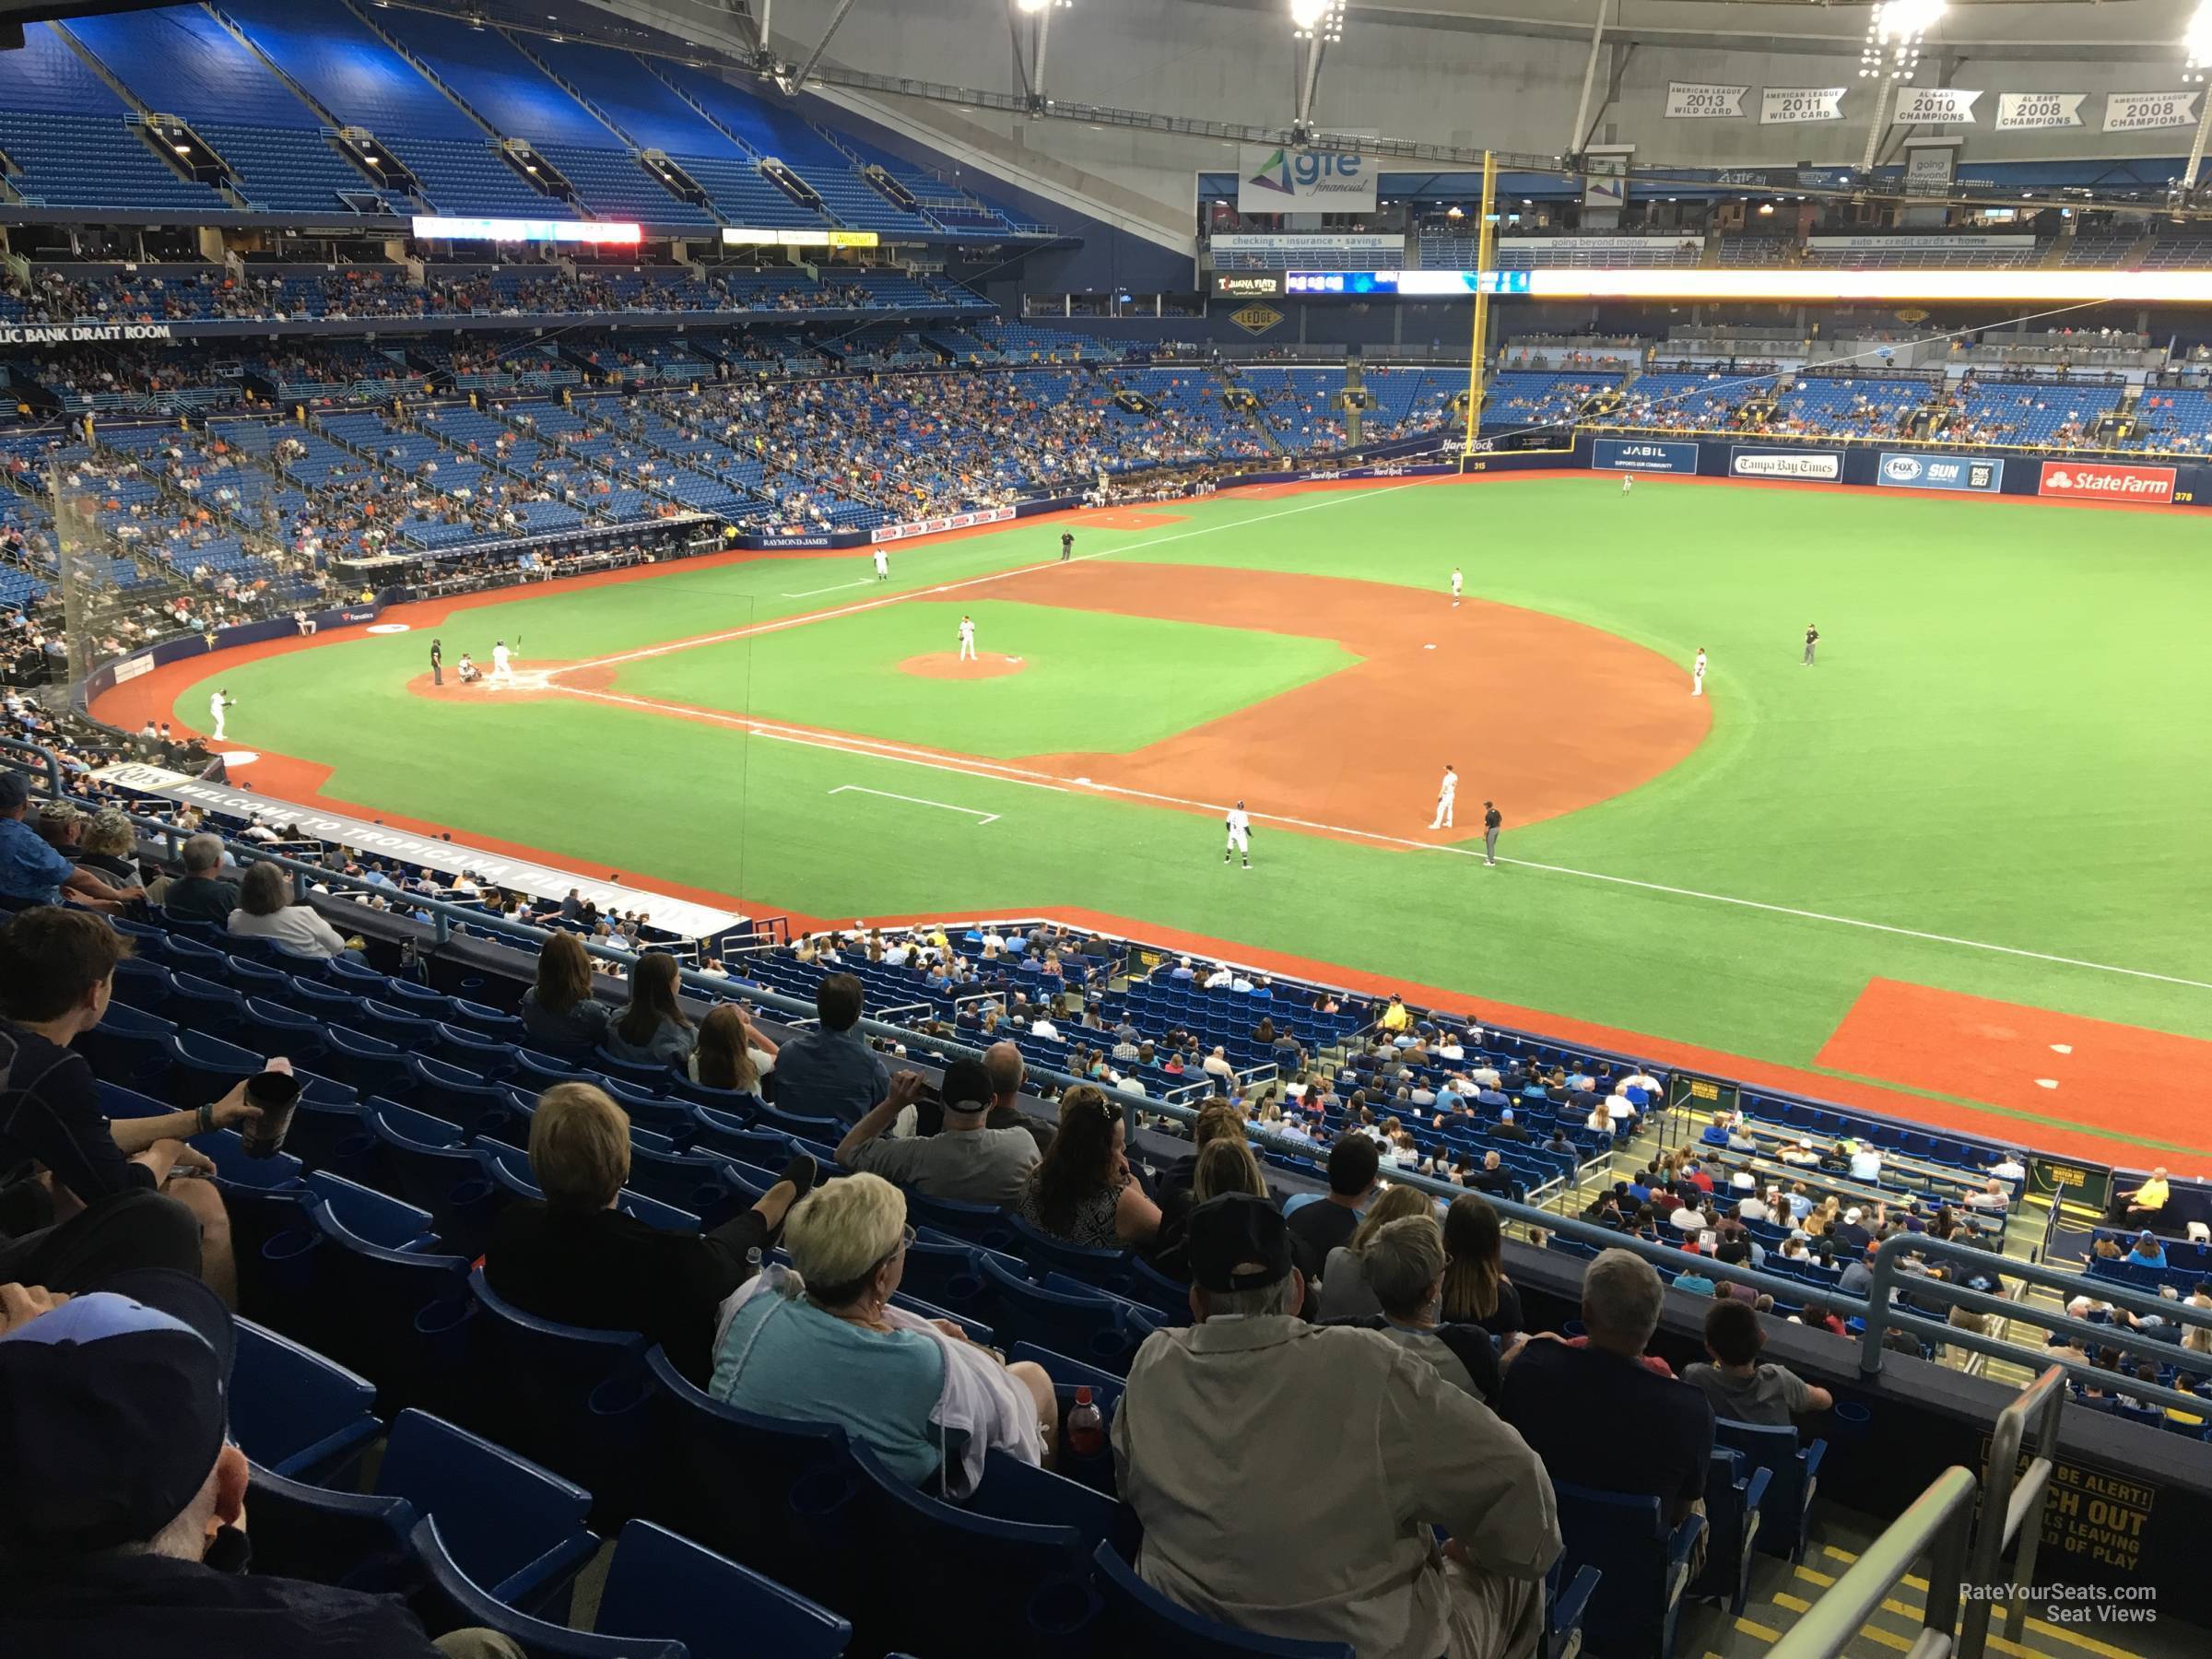 section 218, row h seat view  for baseball - tropicana field